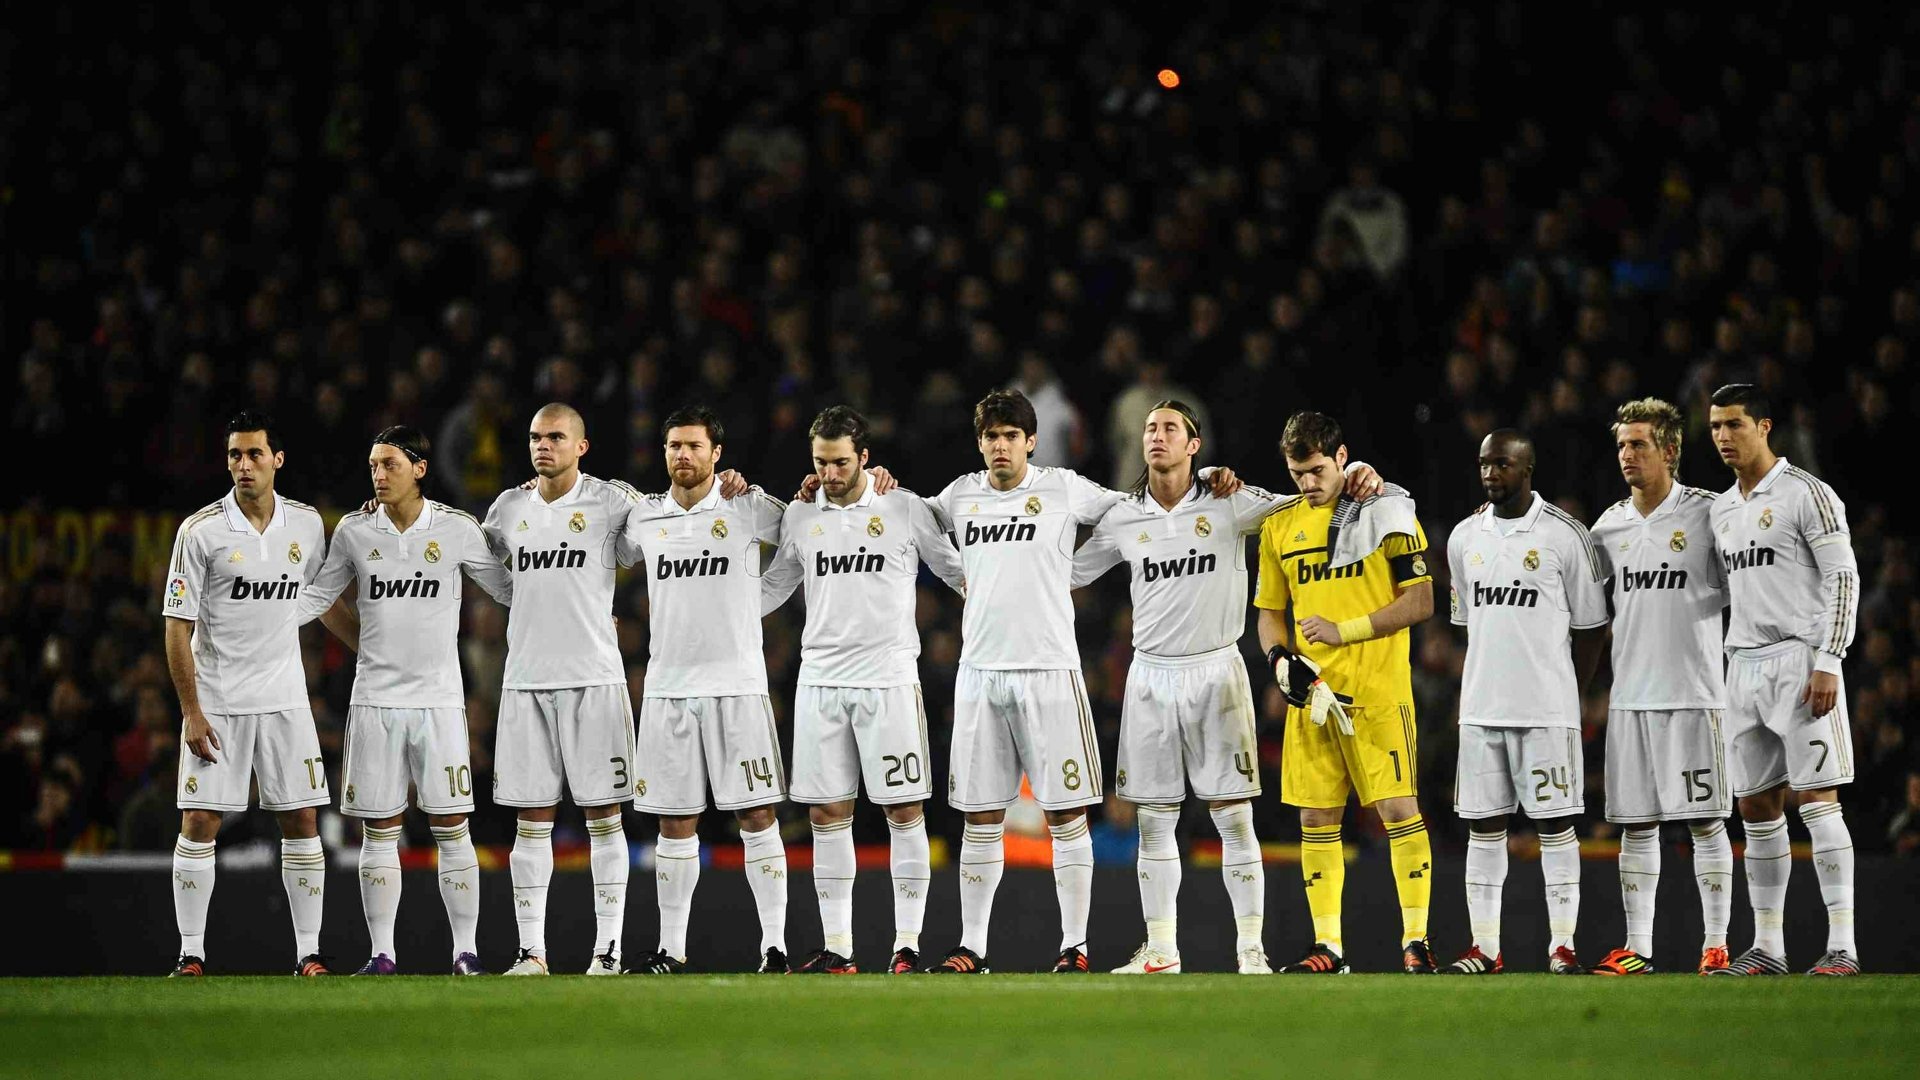 real madrid 4k Ultra HD Wallpaper and Background Image | 3840x2160 | ID ...